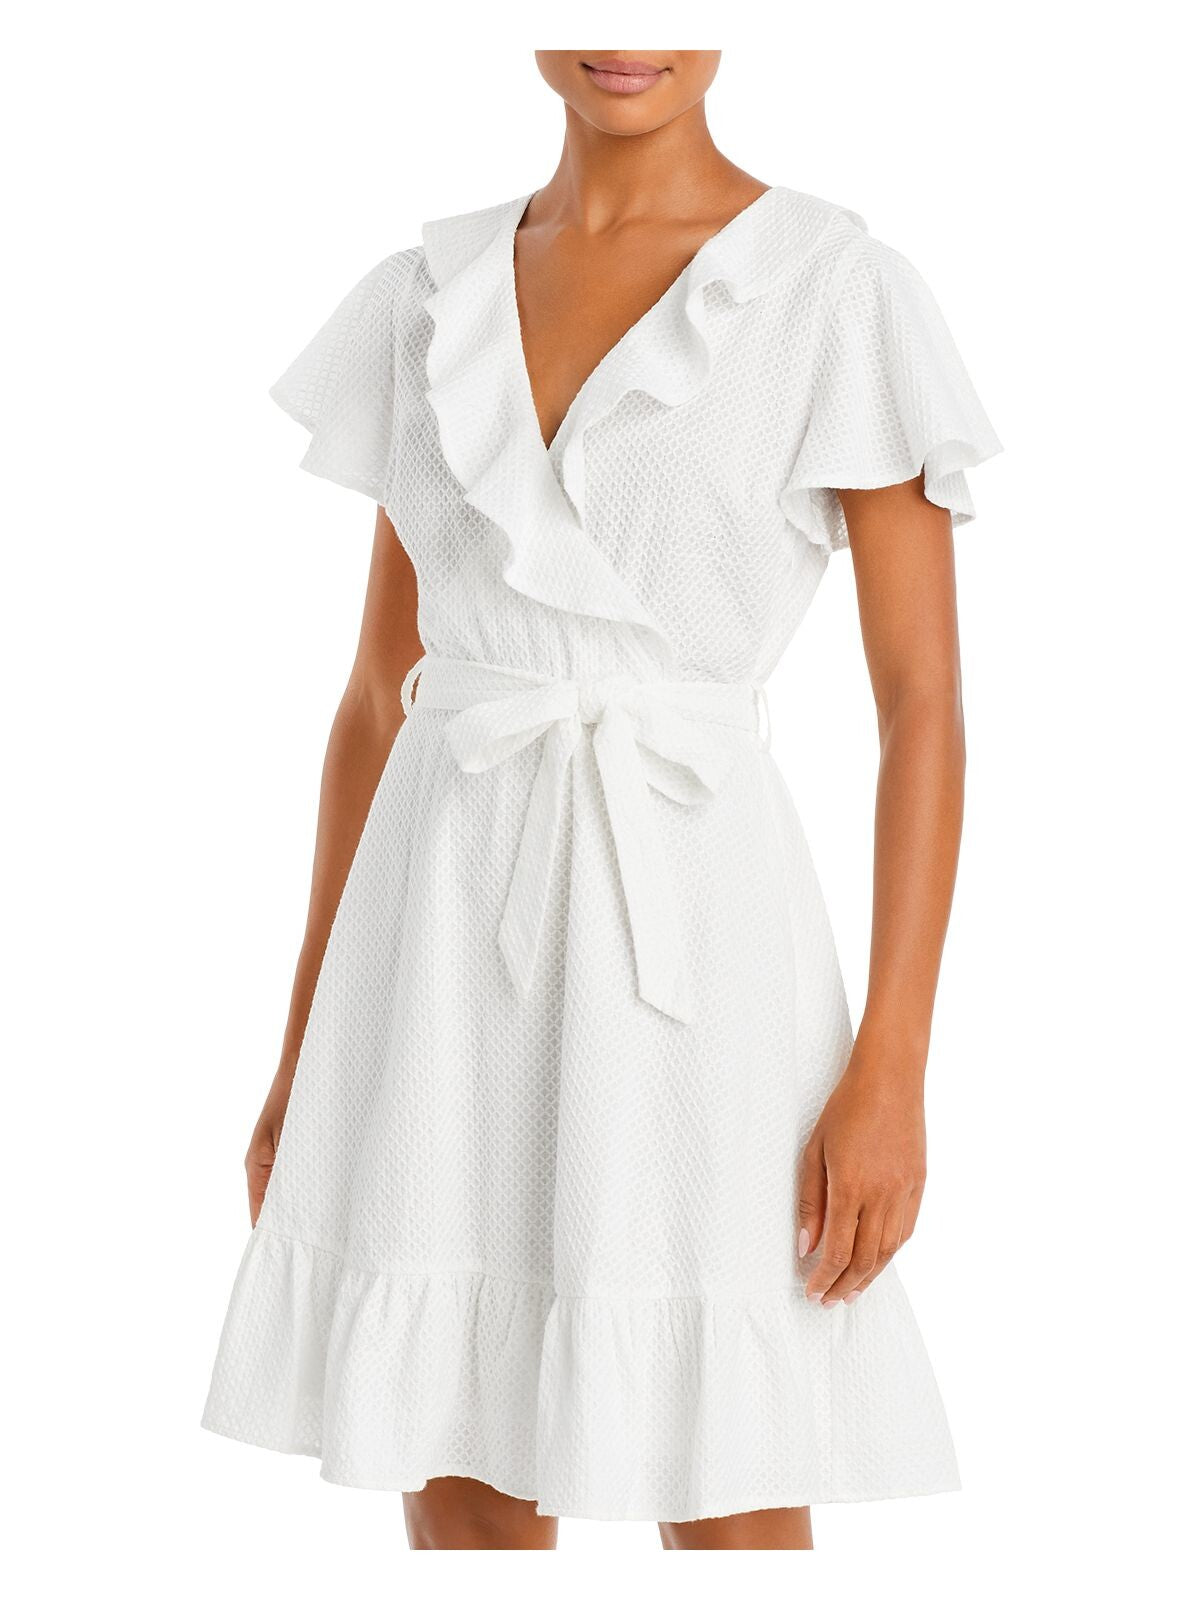 LUCY PARIS Womens White Knit Ruffled Belted Textured Lined Flutter Sleeve Surplice Neckline Short Fit + Flare Dress L